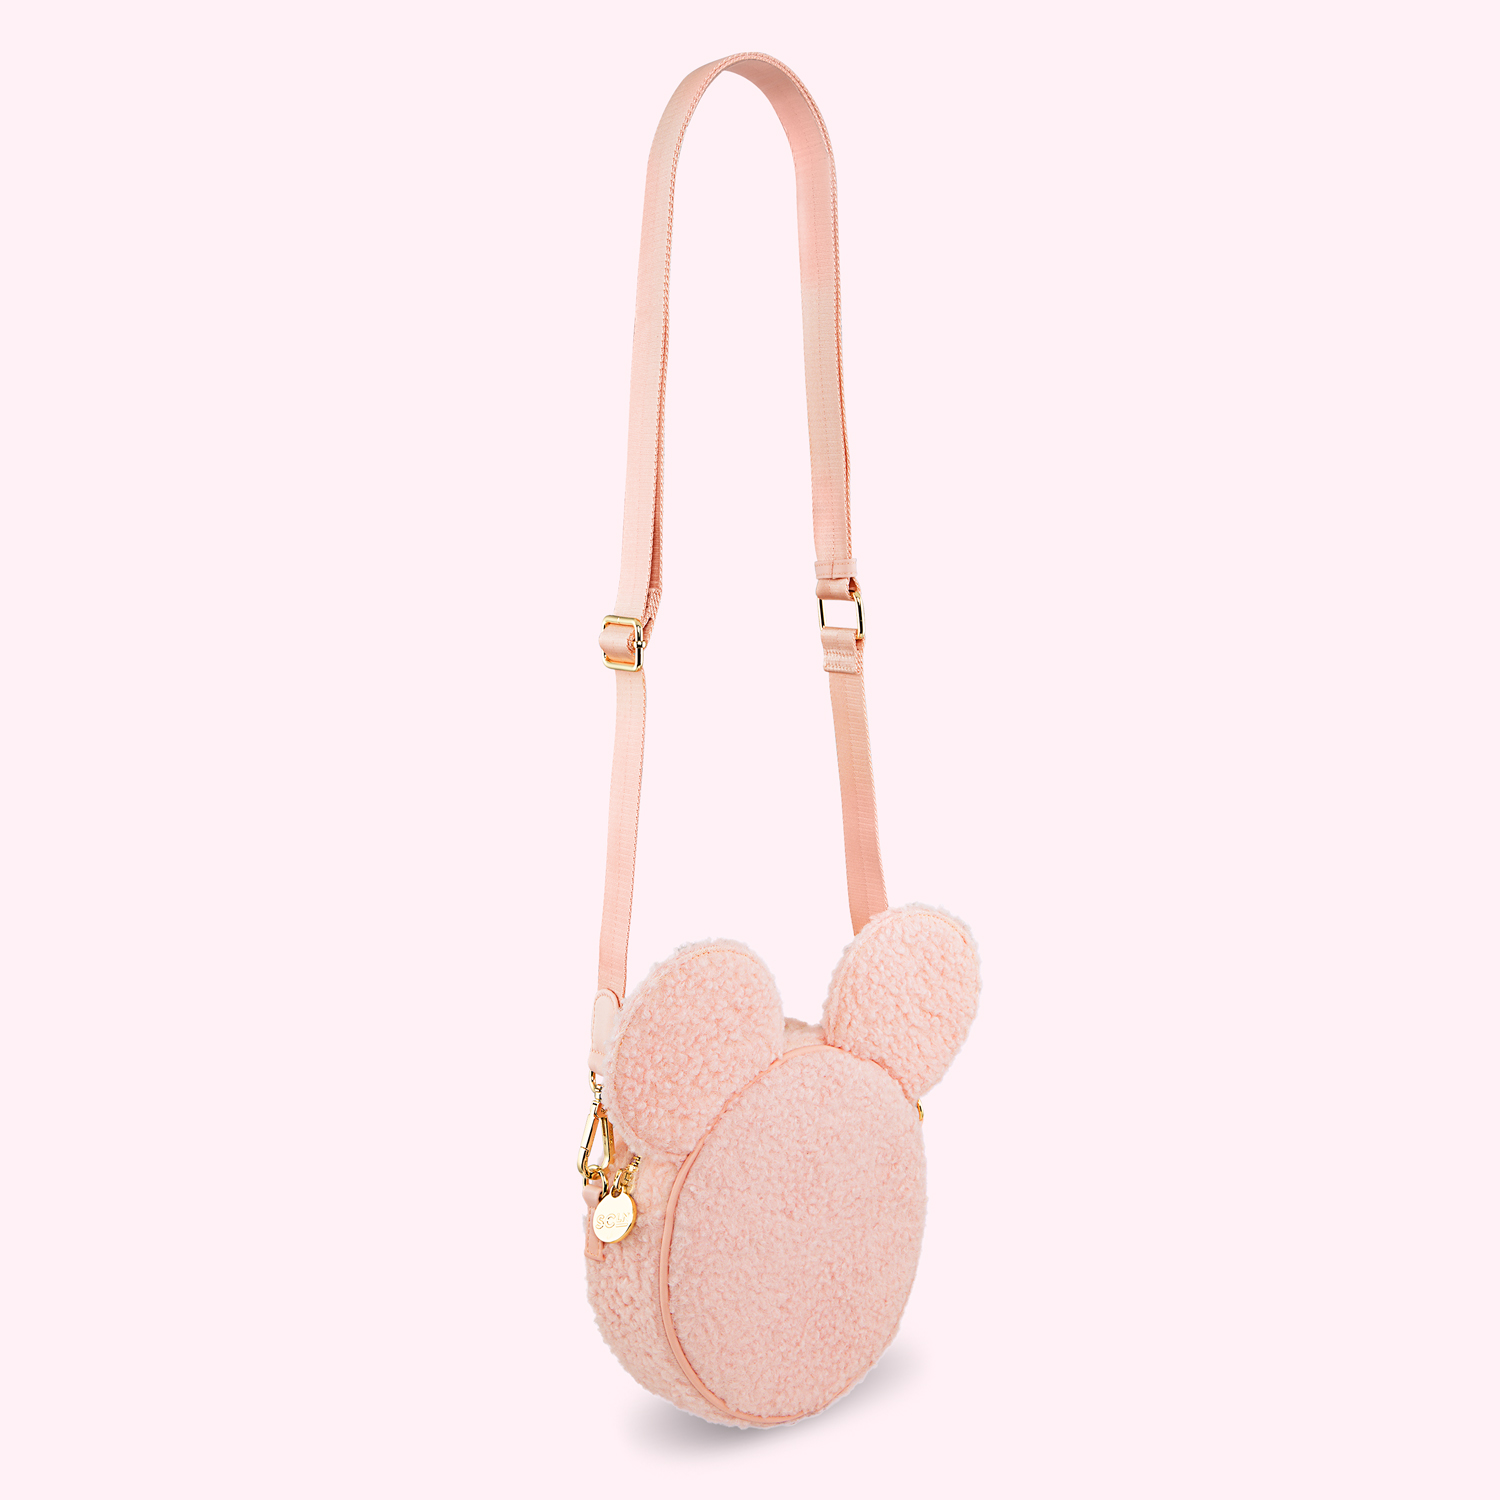 Buy Stitch Shoppe Mickey Mouse Exclusive Winter Snowman Iridescent Figural  Crossbody Bag at Loungefly.